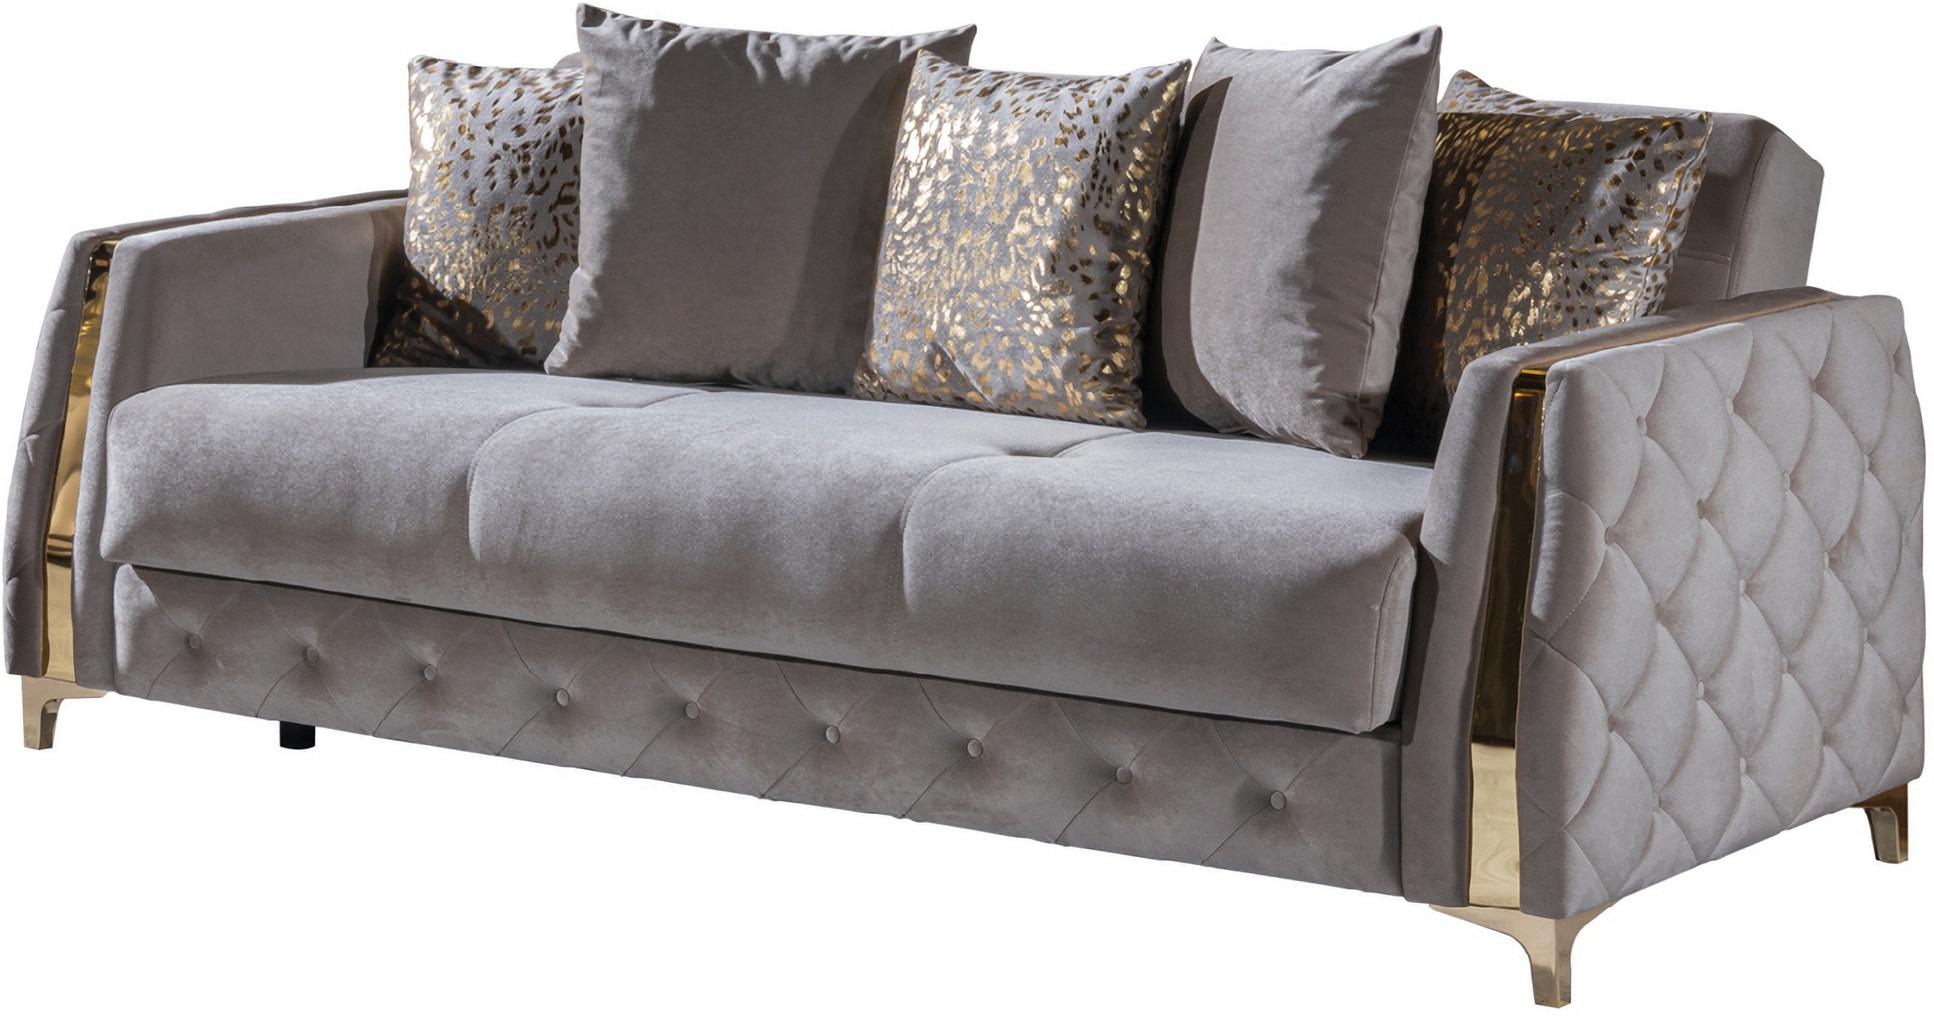 

    
Sleeper Sofa Set 2Pcs with Under Seat Storage In Taupe Lust Galaxy Home Modern
